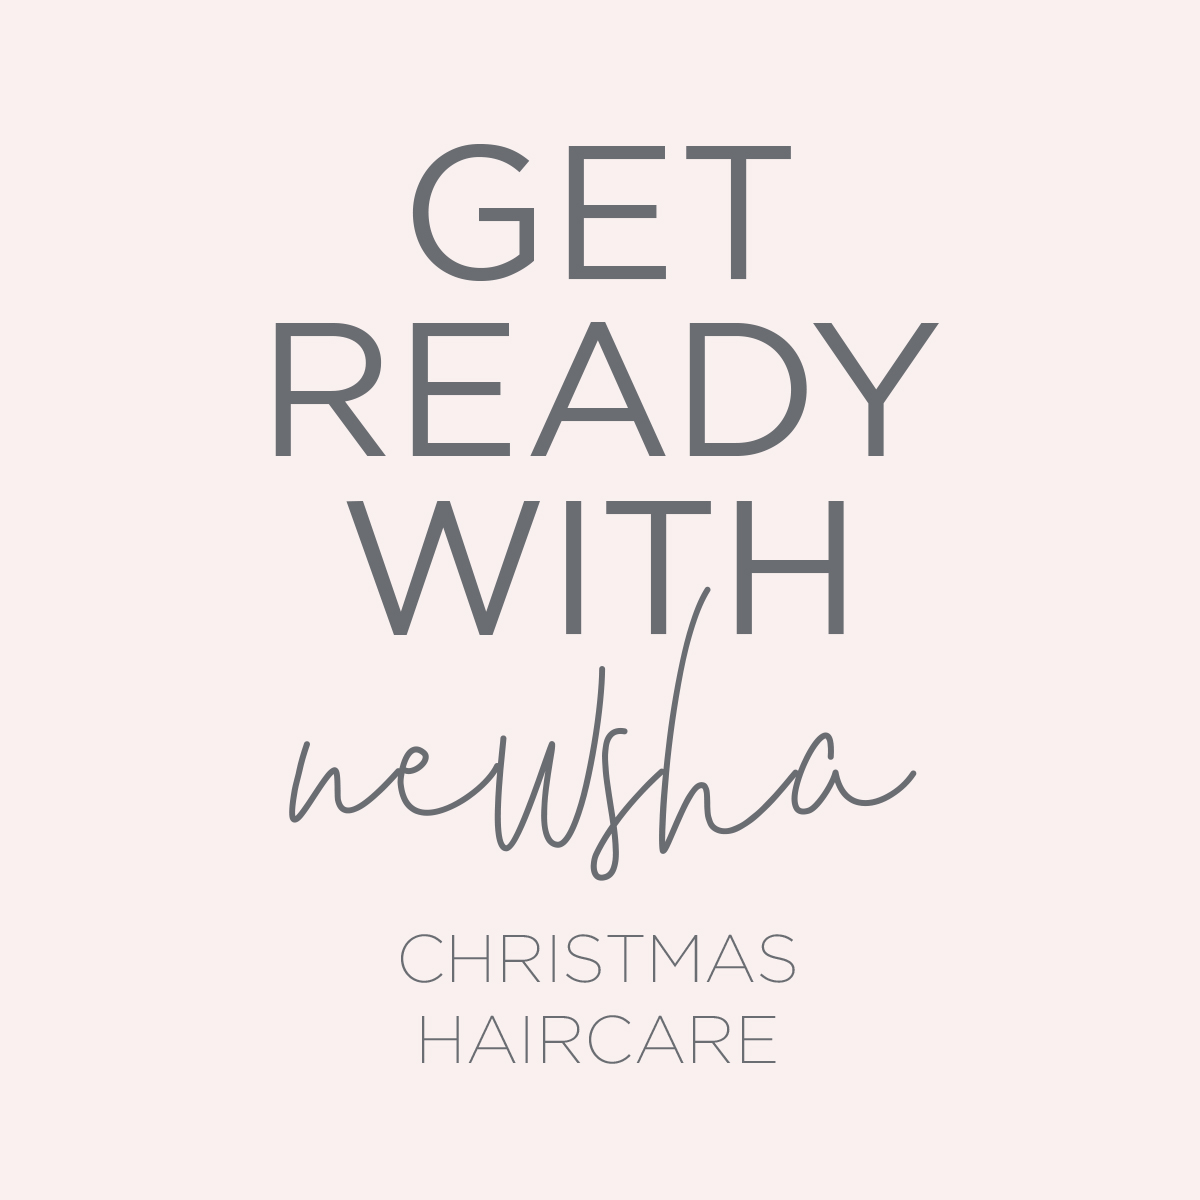 Your perfect hair care routine for beautiful, glowing hair this Christmas